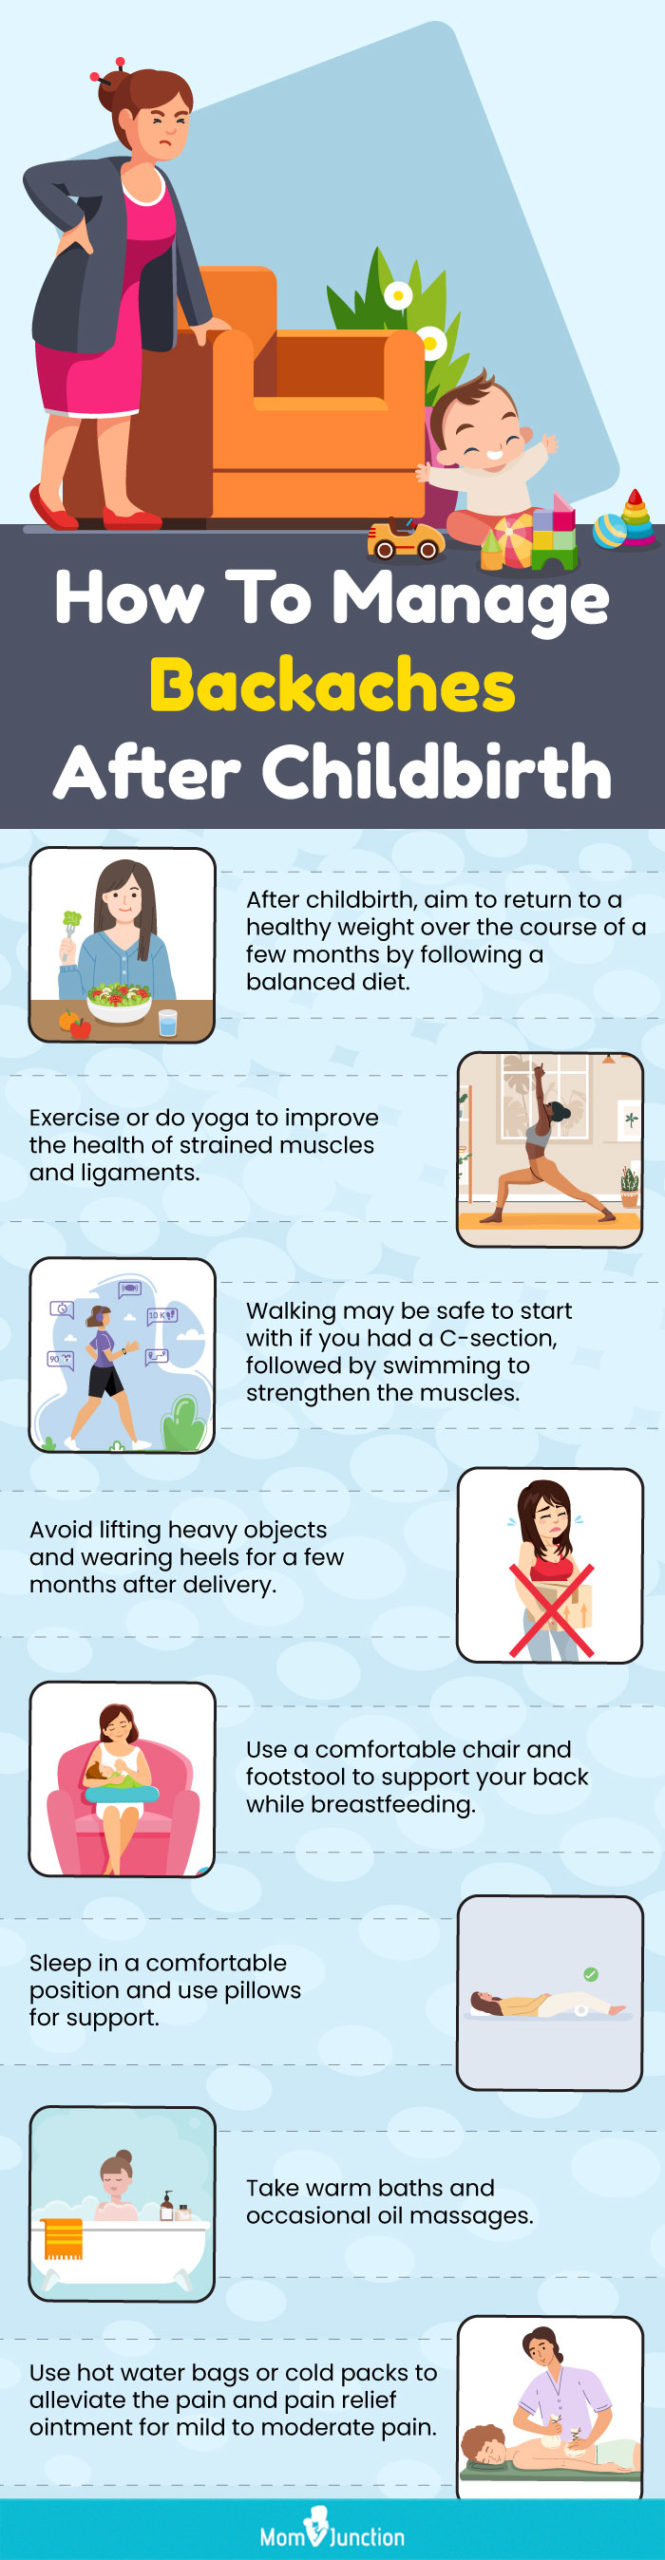 https://www.momjunction.com/wp-content/uploads/2014/07/Infographic-Ways-To-Get-Relief-From-Back-Pain-Post-Delivery-scaled.jpg